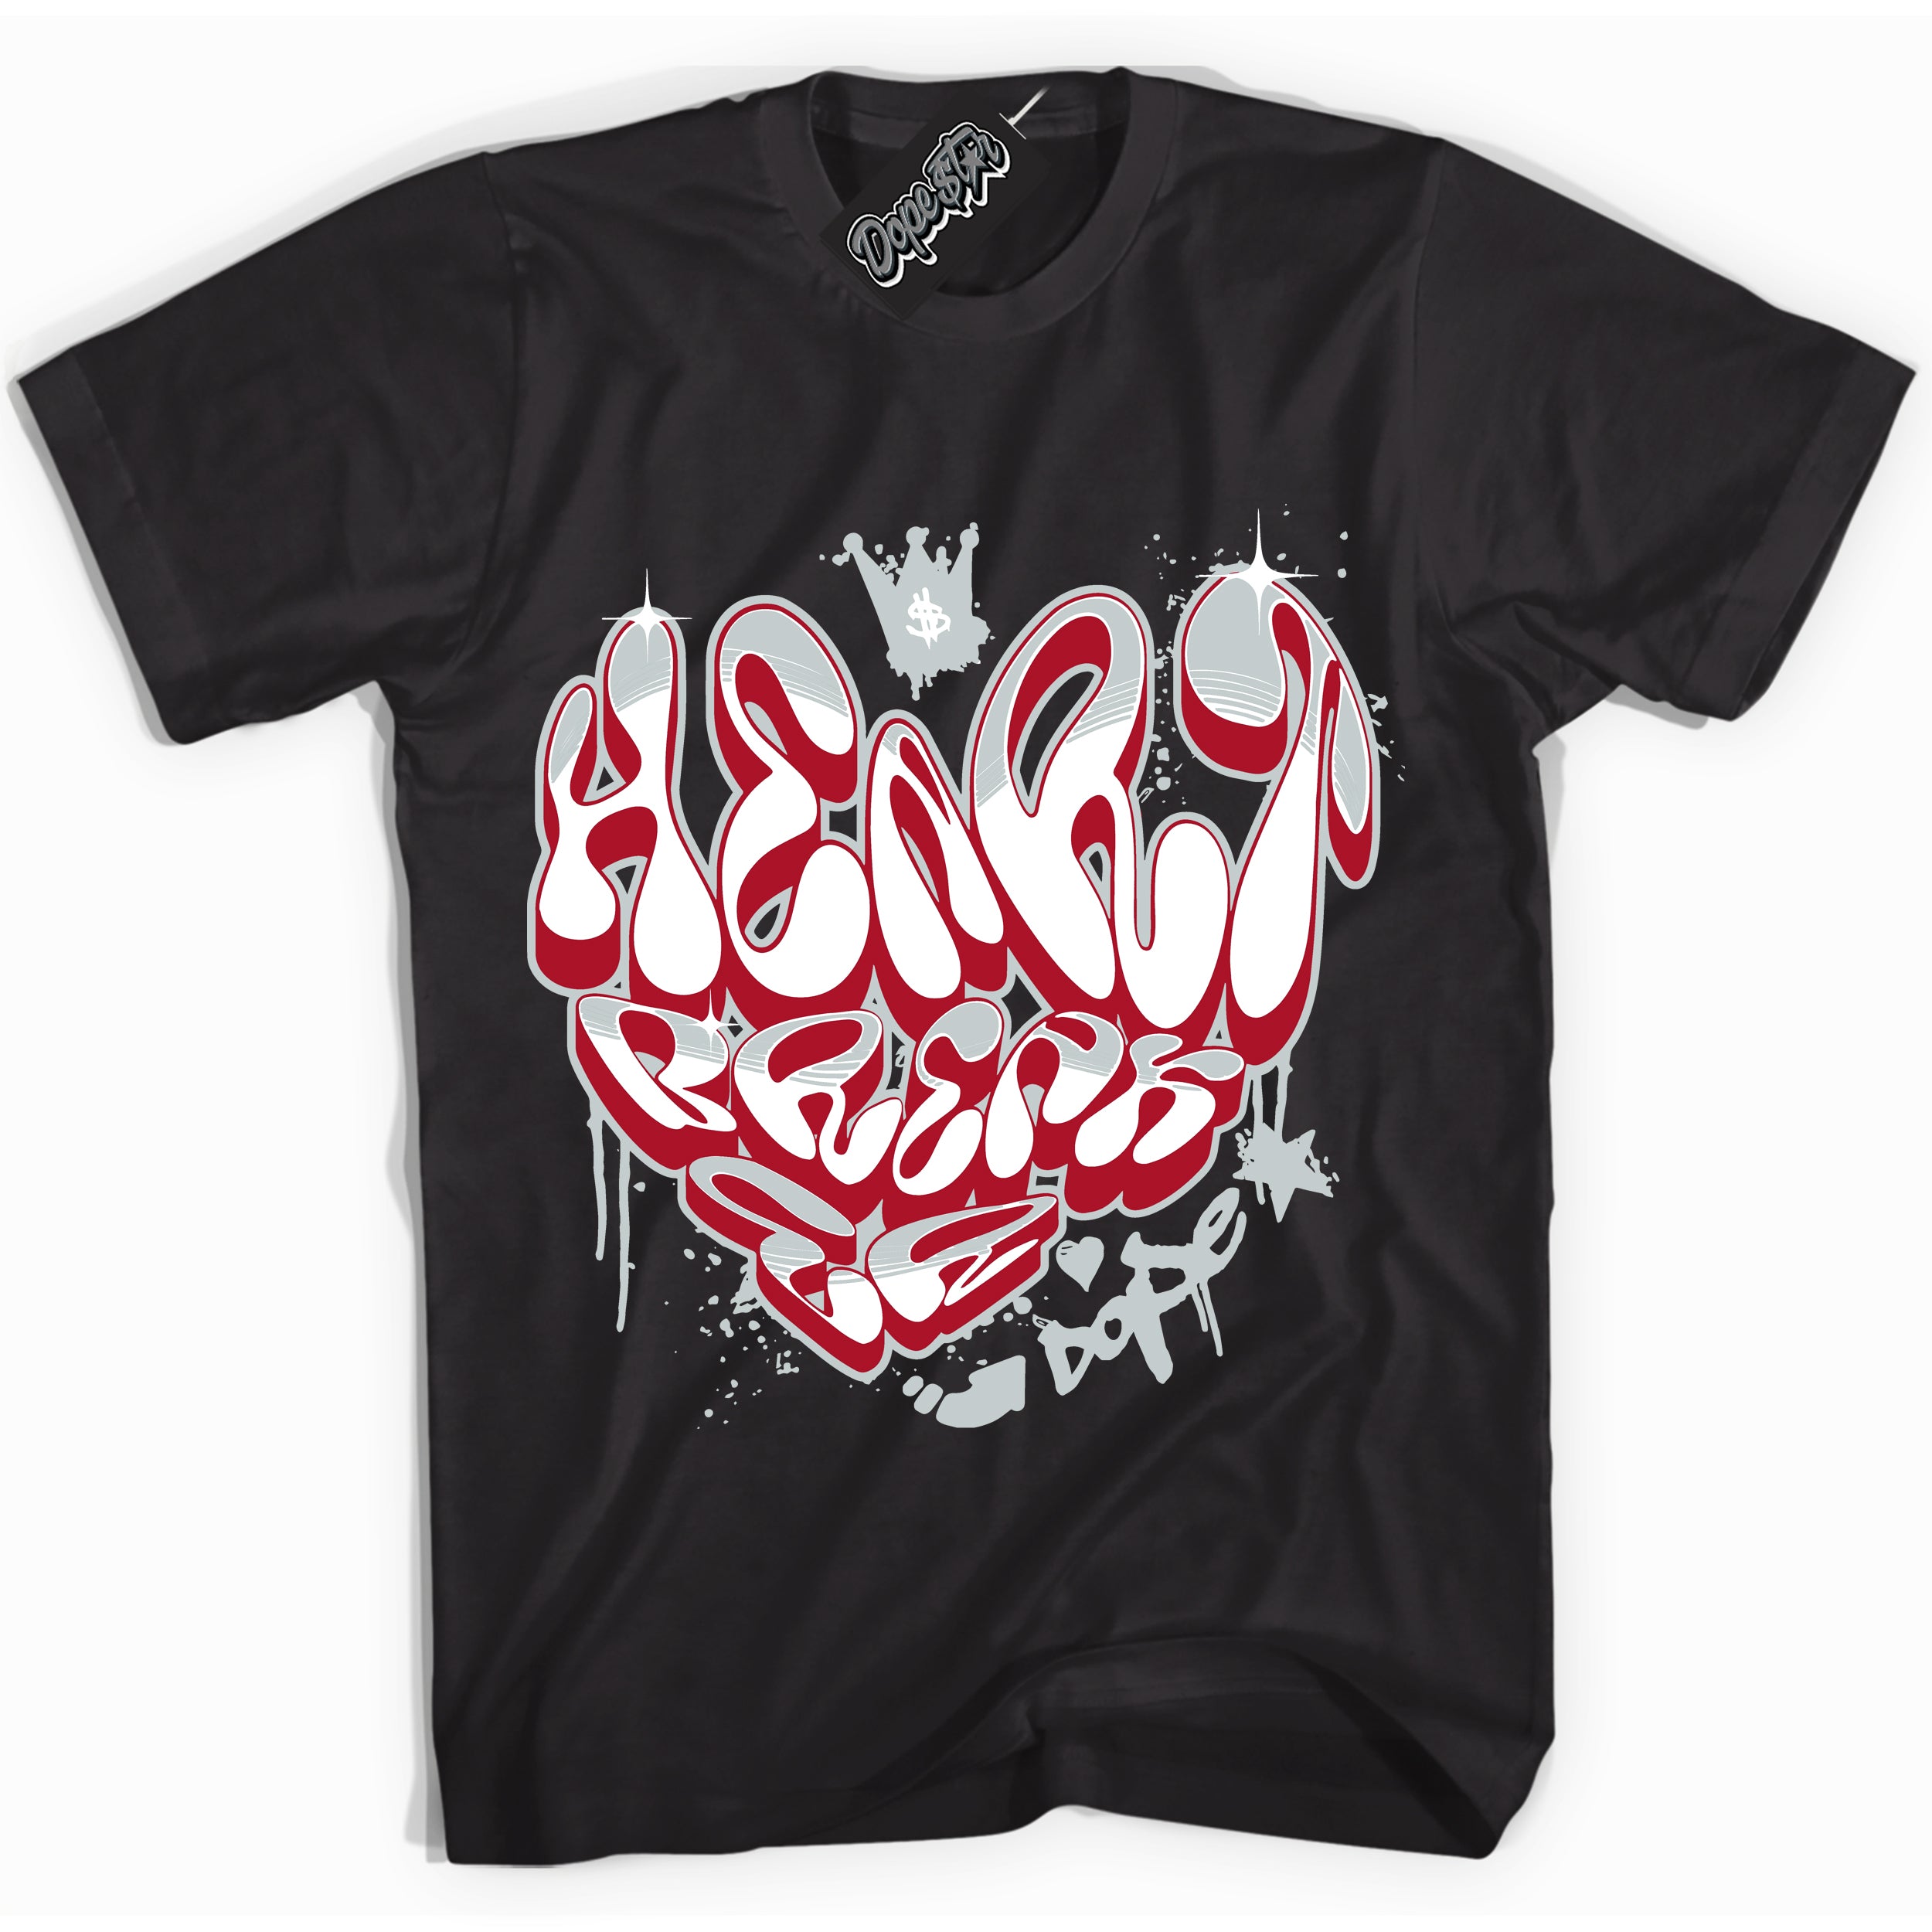 Cool Black Shirt with “ Heartbreaker Graffiti” design that perfectly matches Reverse Ultraman Sneakers.